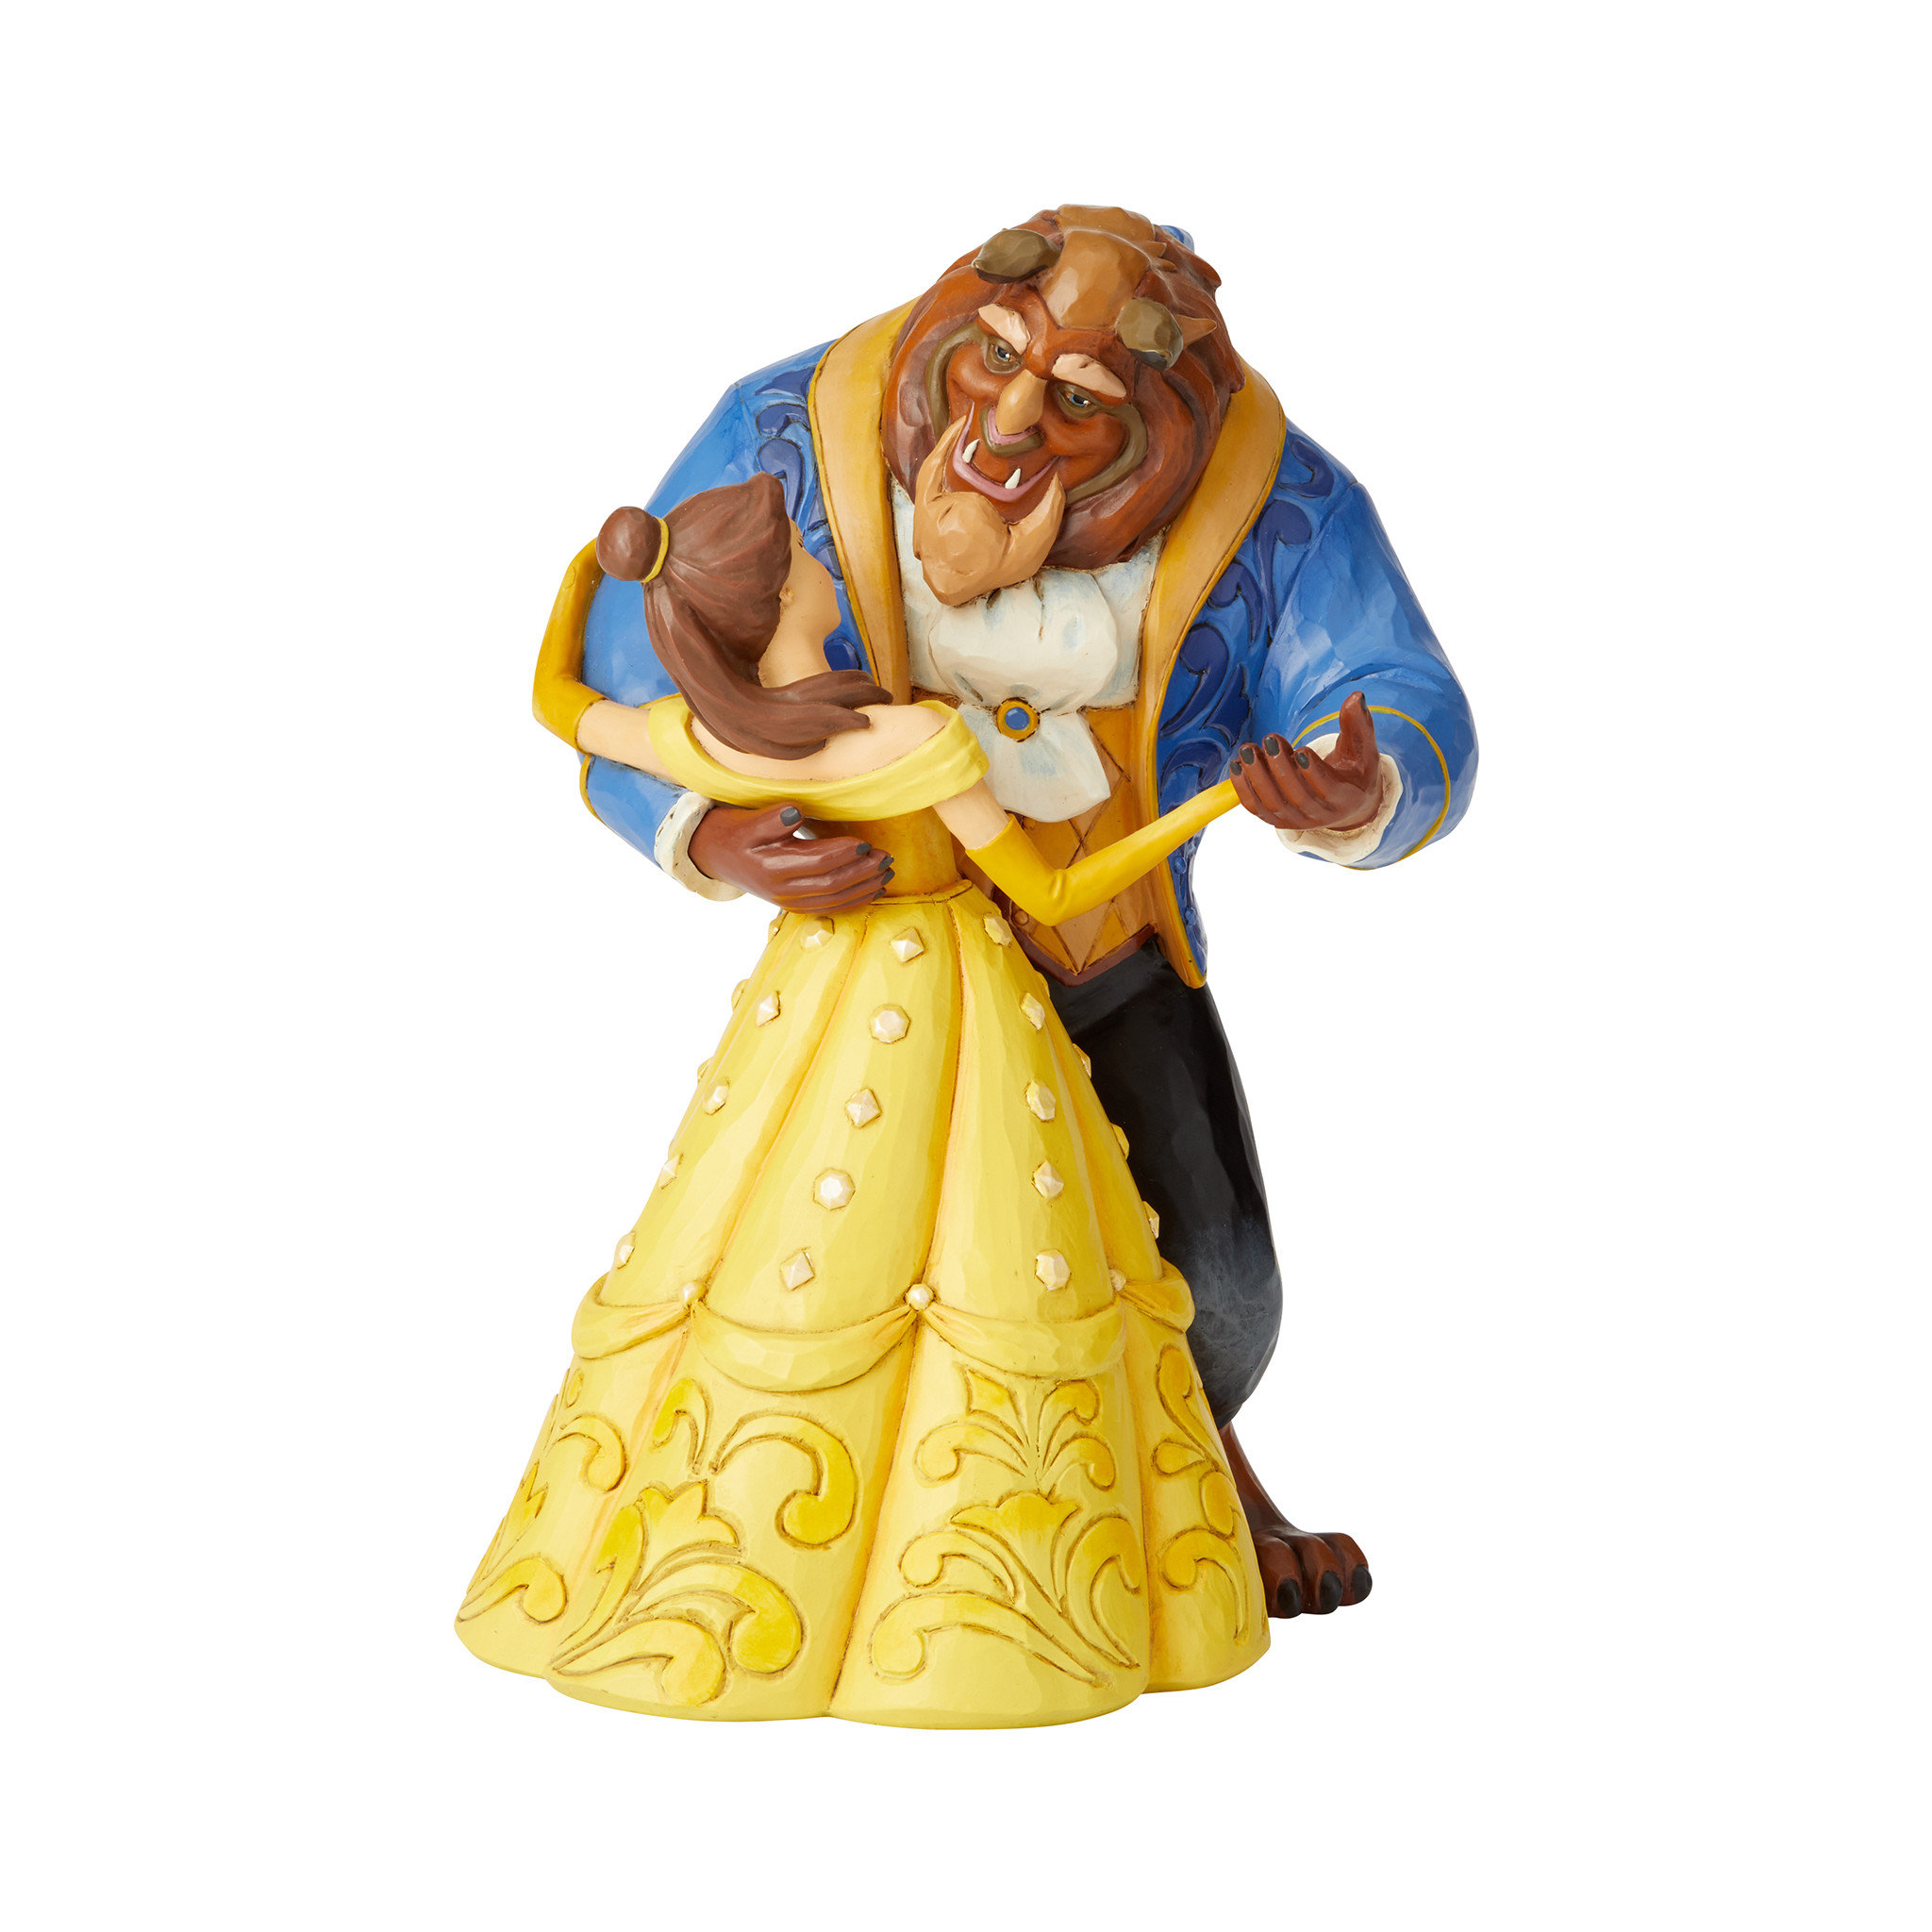 Enchanted Christmas - Beauty Beast Snowman Figurine - Disney Traditions by  Jim Shore - New